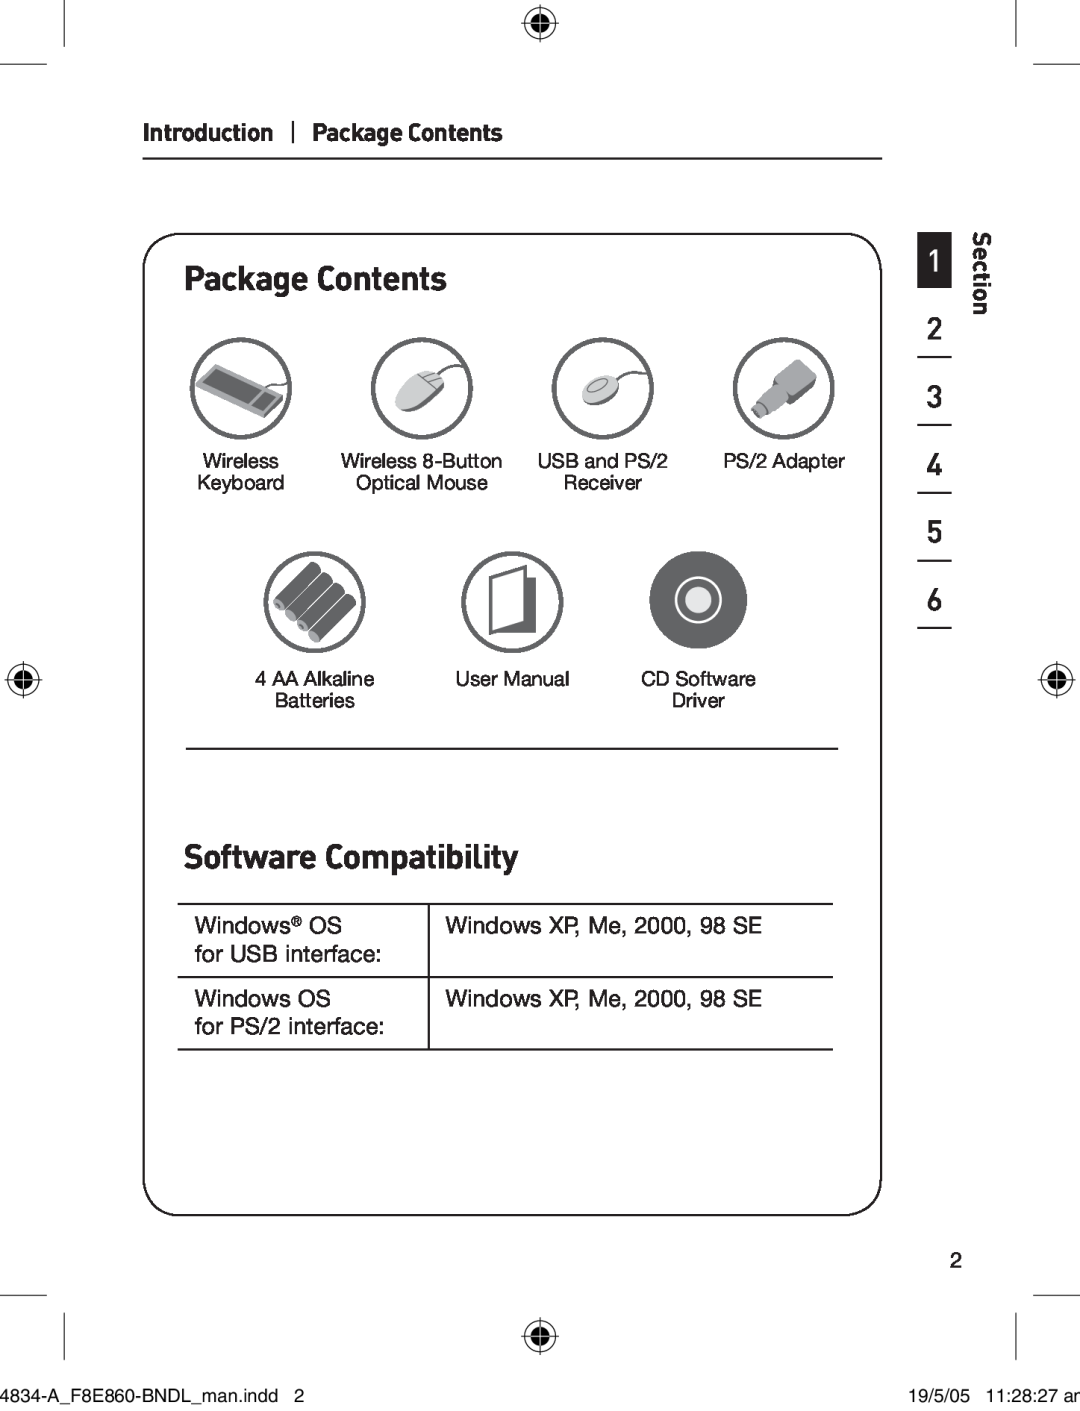 Belkin F8E860-BNDL Software Compatibility, Introduction Package Contents, Windows OS, Windows XP, Me, 2000, 98 SE 